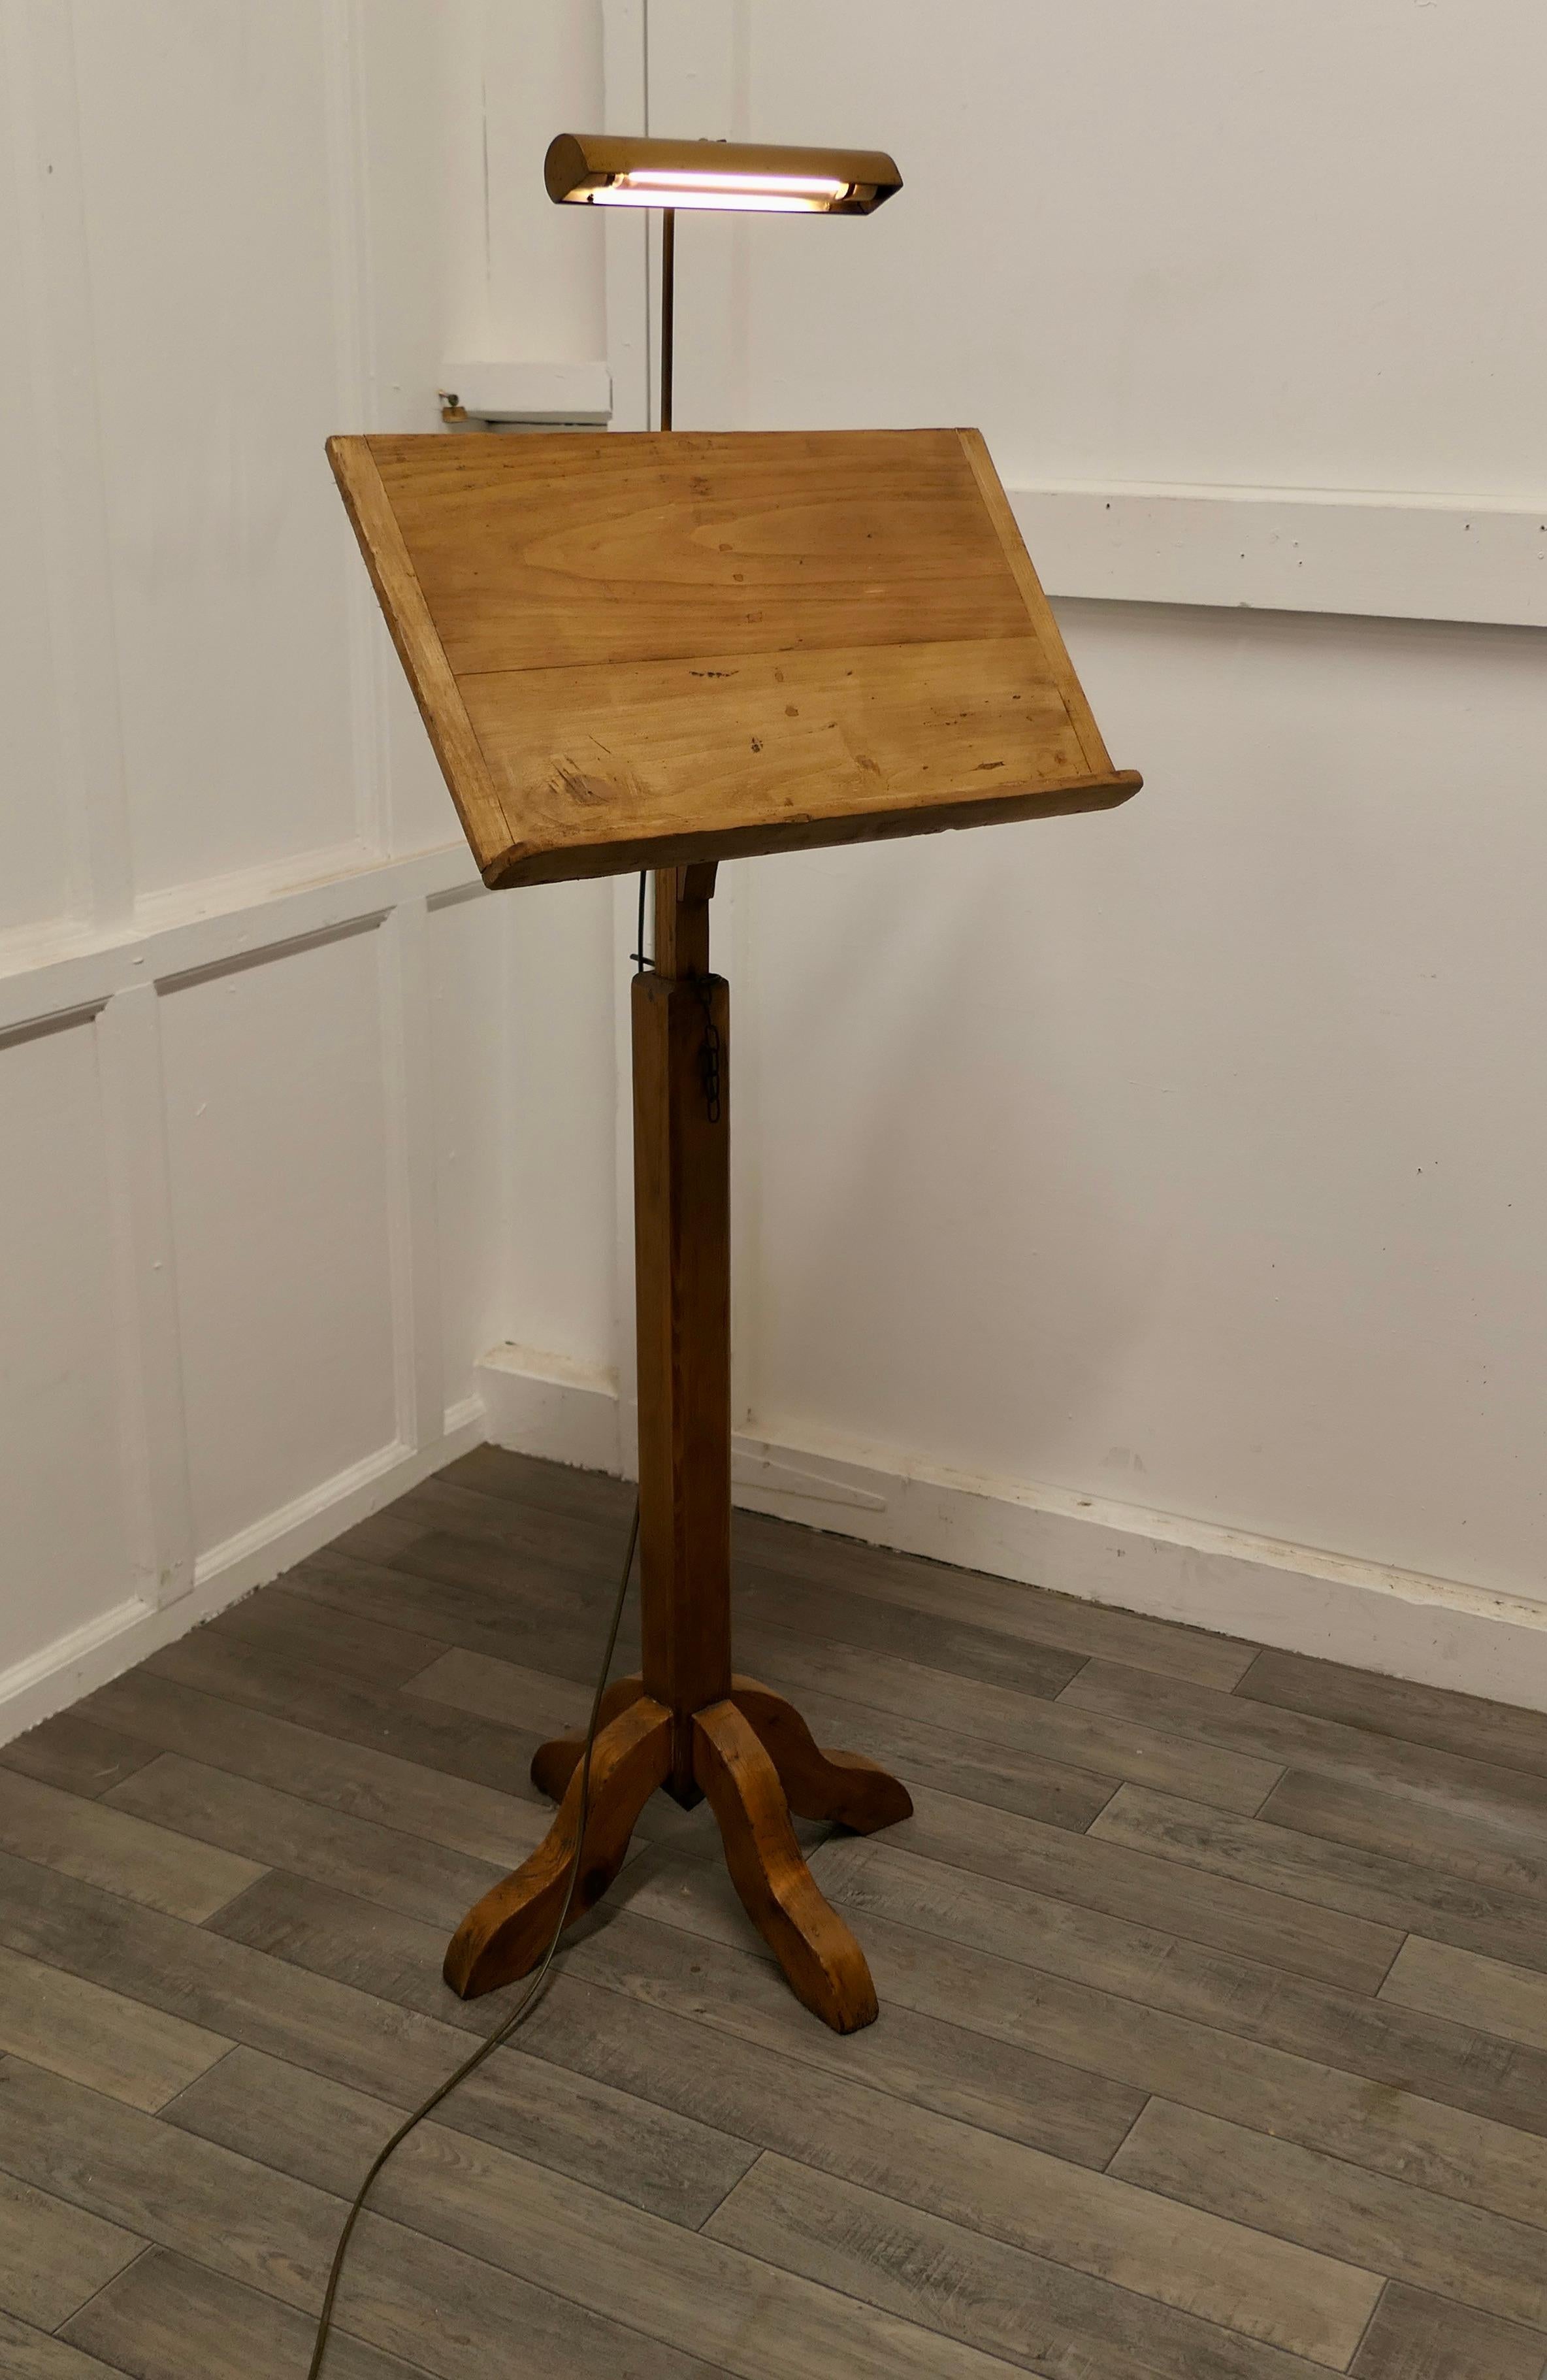 Arts & Crafts Menu Podium, Maître d' stand with reading lamp 

This is a charming piece full of character, it is tilted and a good size to hold menus with a light above the book holder
The Stand is set on a chunky X shaped Pitch Pine base which